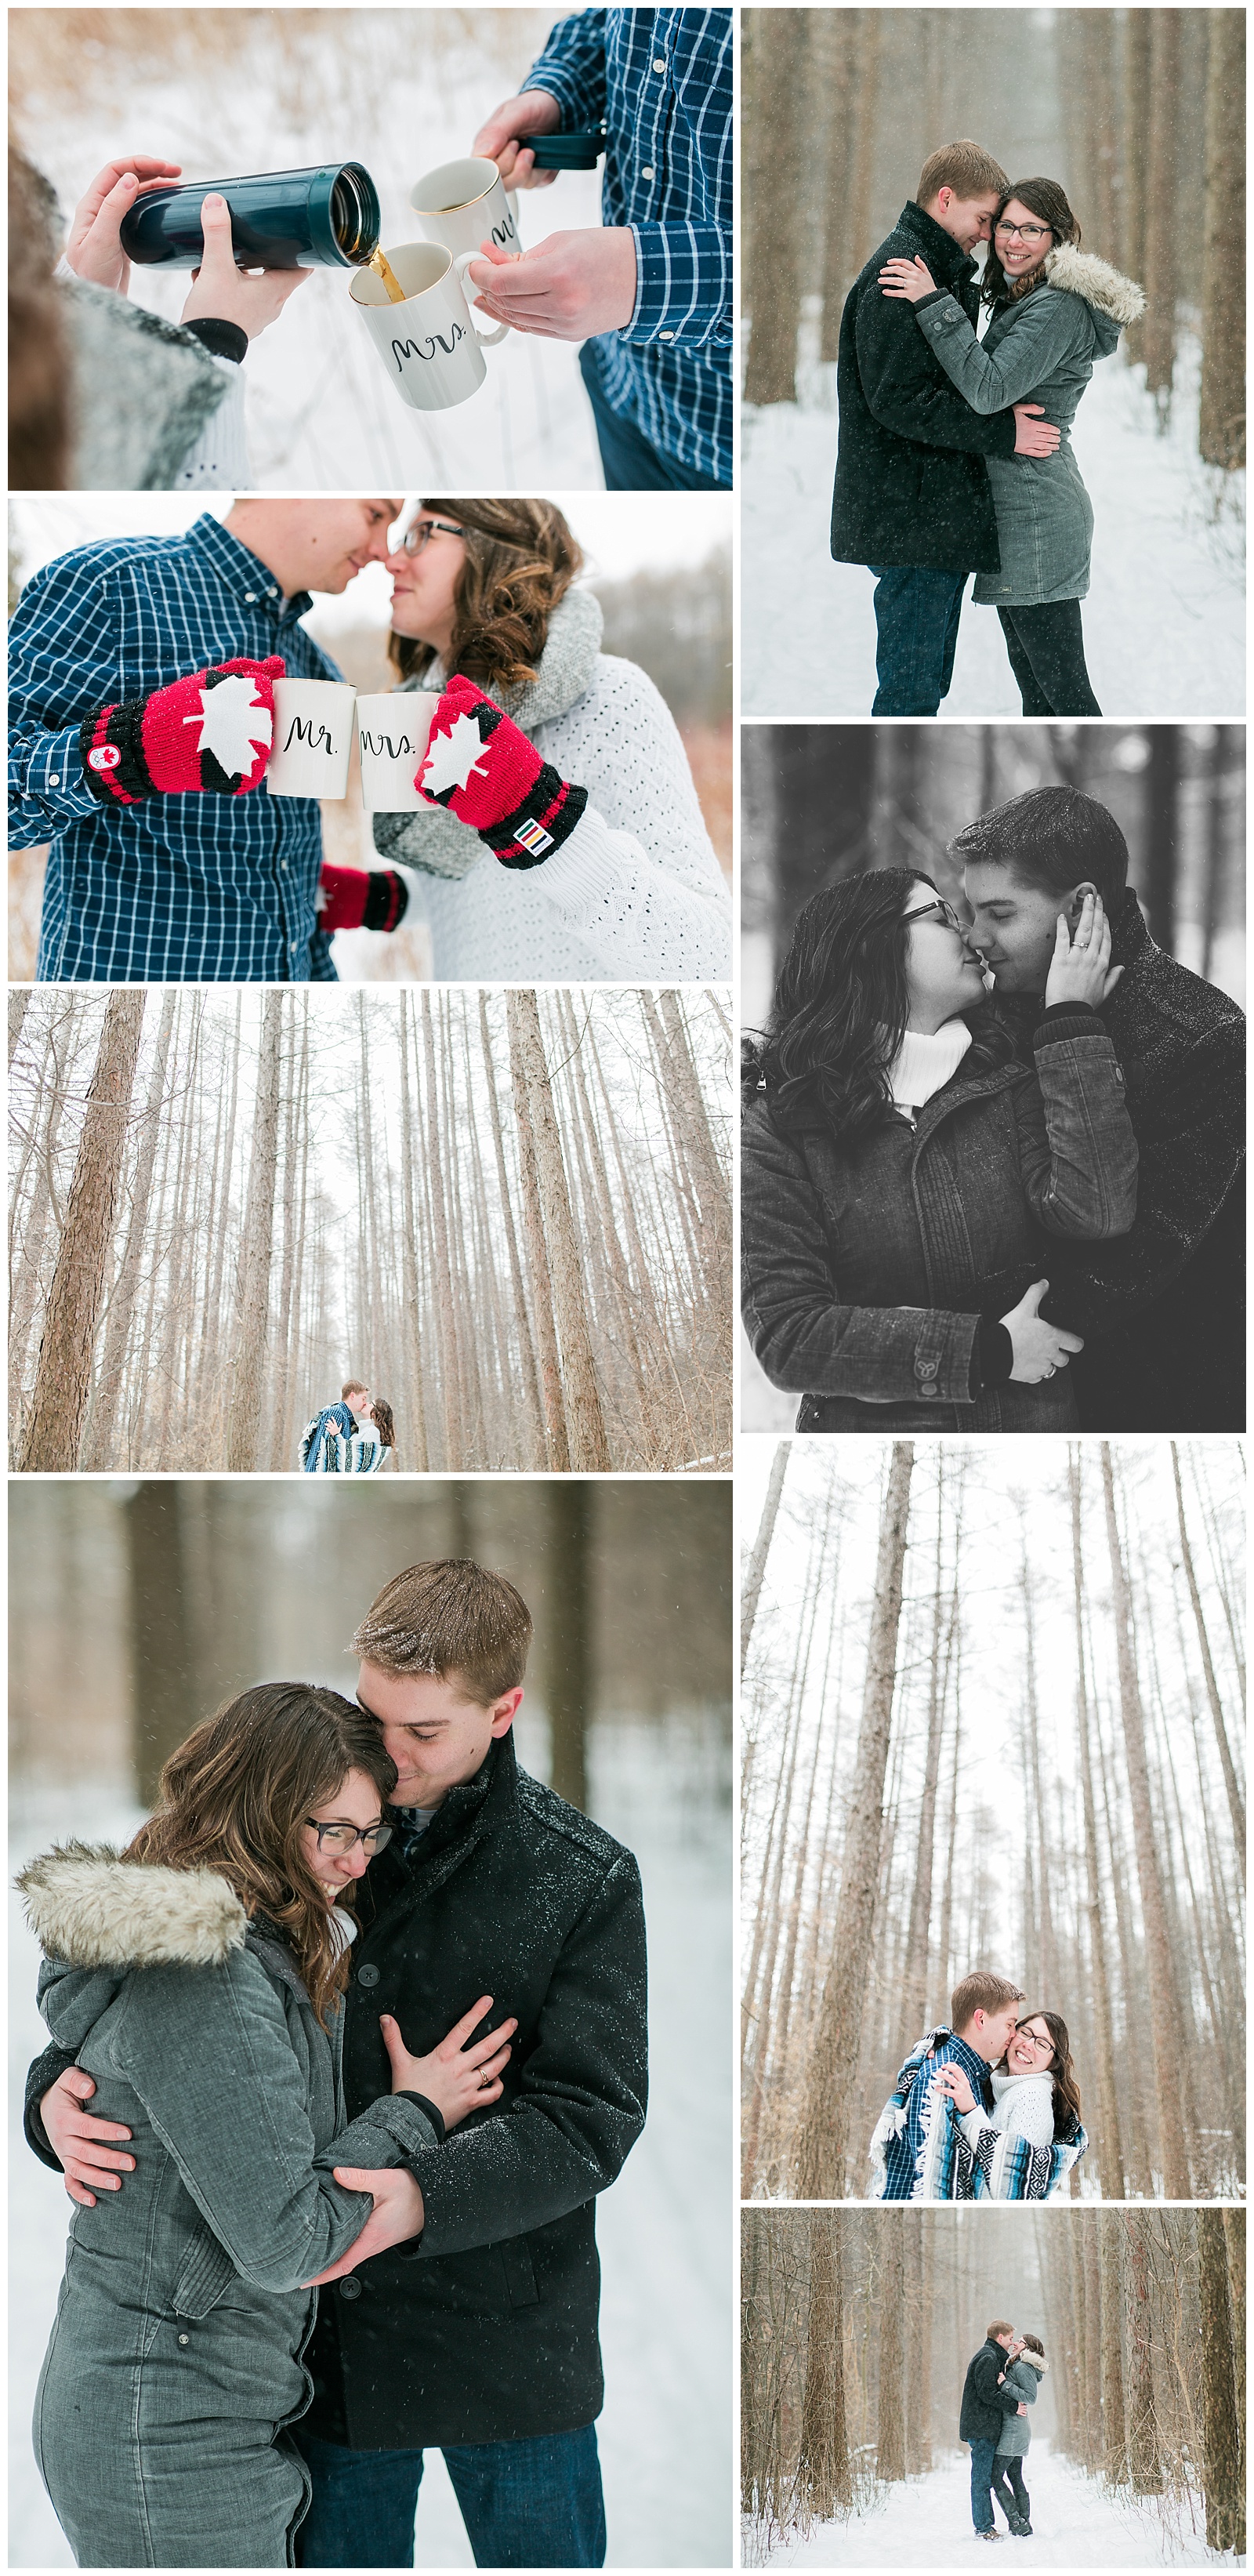 London-Ontario-engagement-session-Fanshawe-conservation-wedding-photographer-photography-wesley-forbes-married-bride-groom-best-venue-popular-weddings